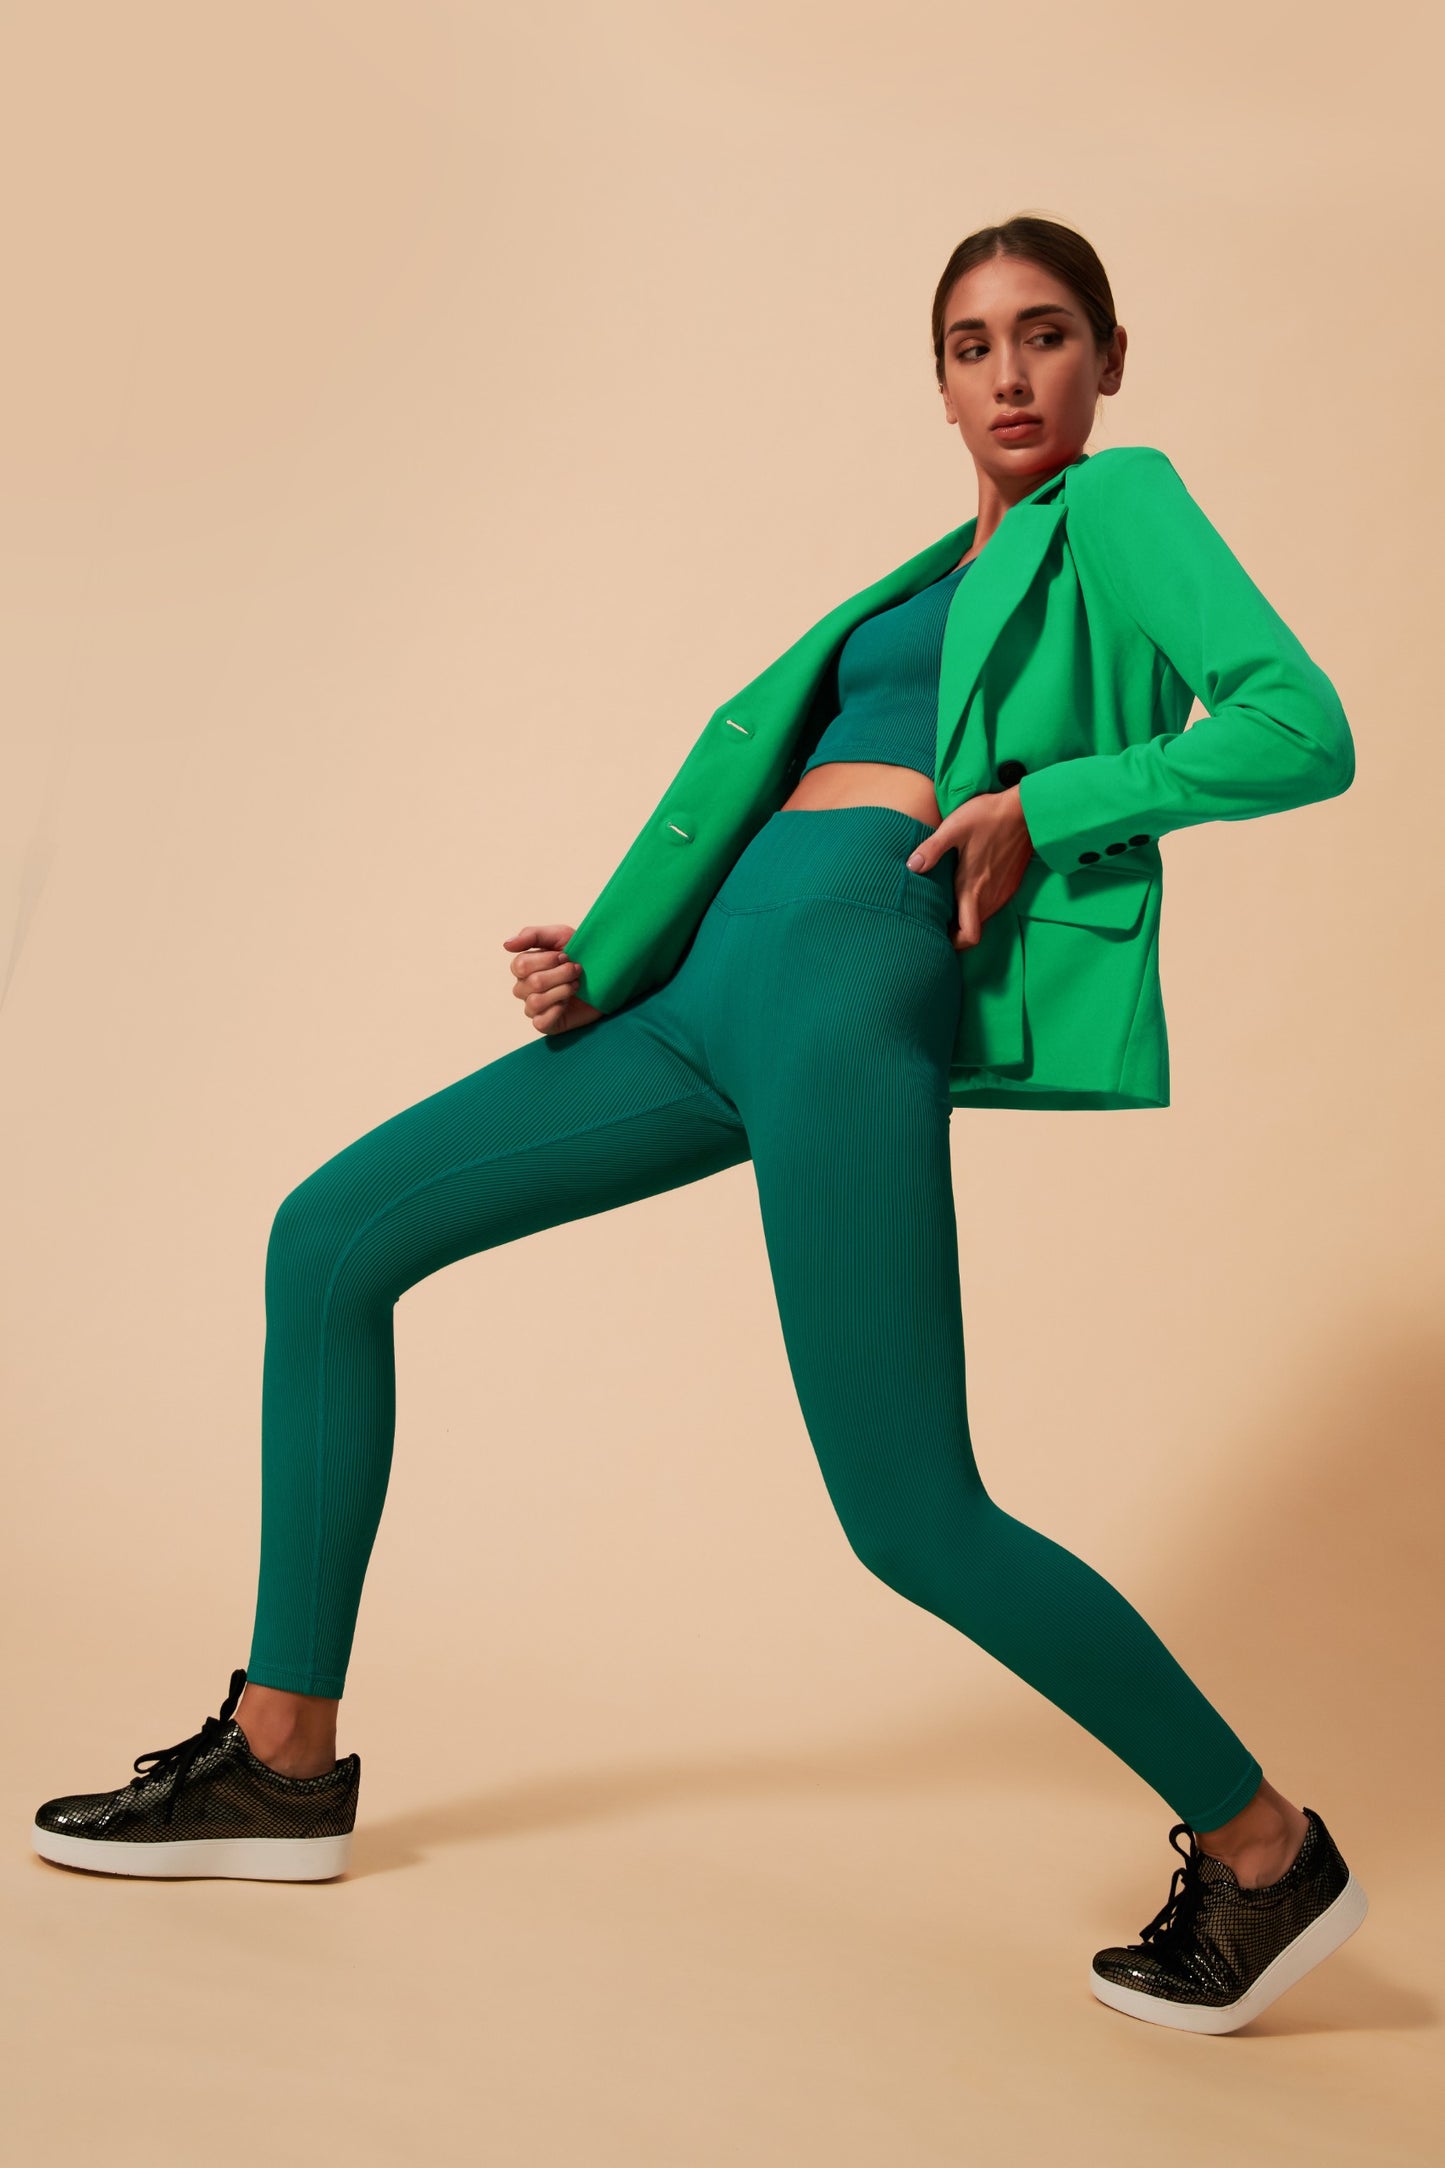 Stylish green women's jacket by Tifan Blazer, perfect for any occasion.